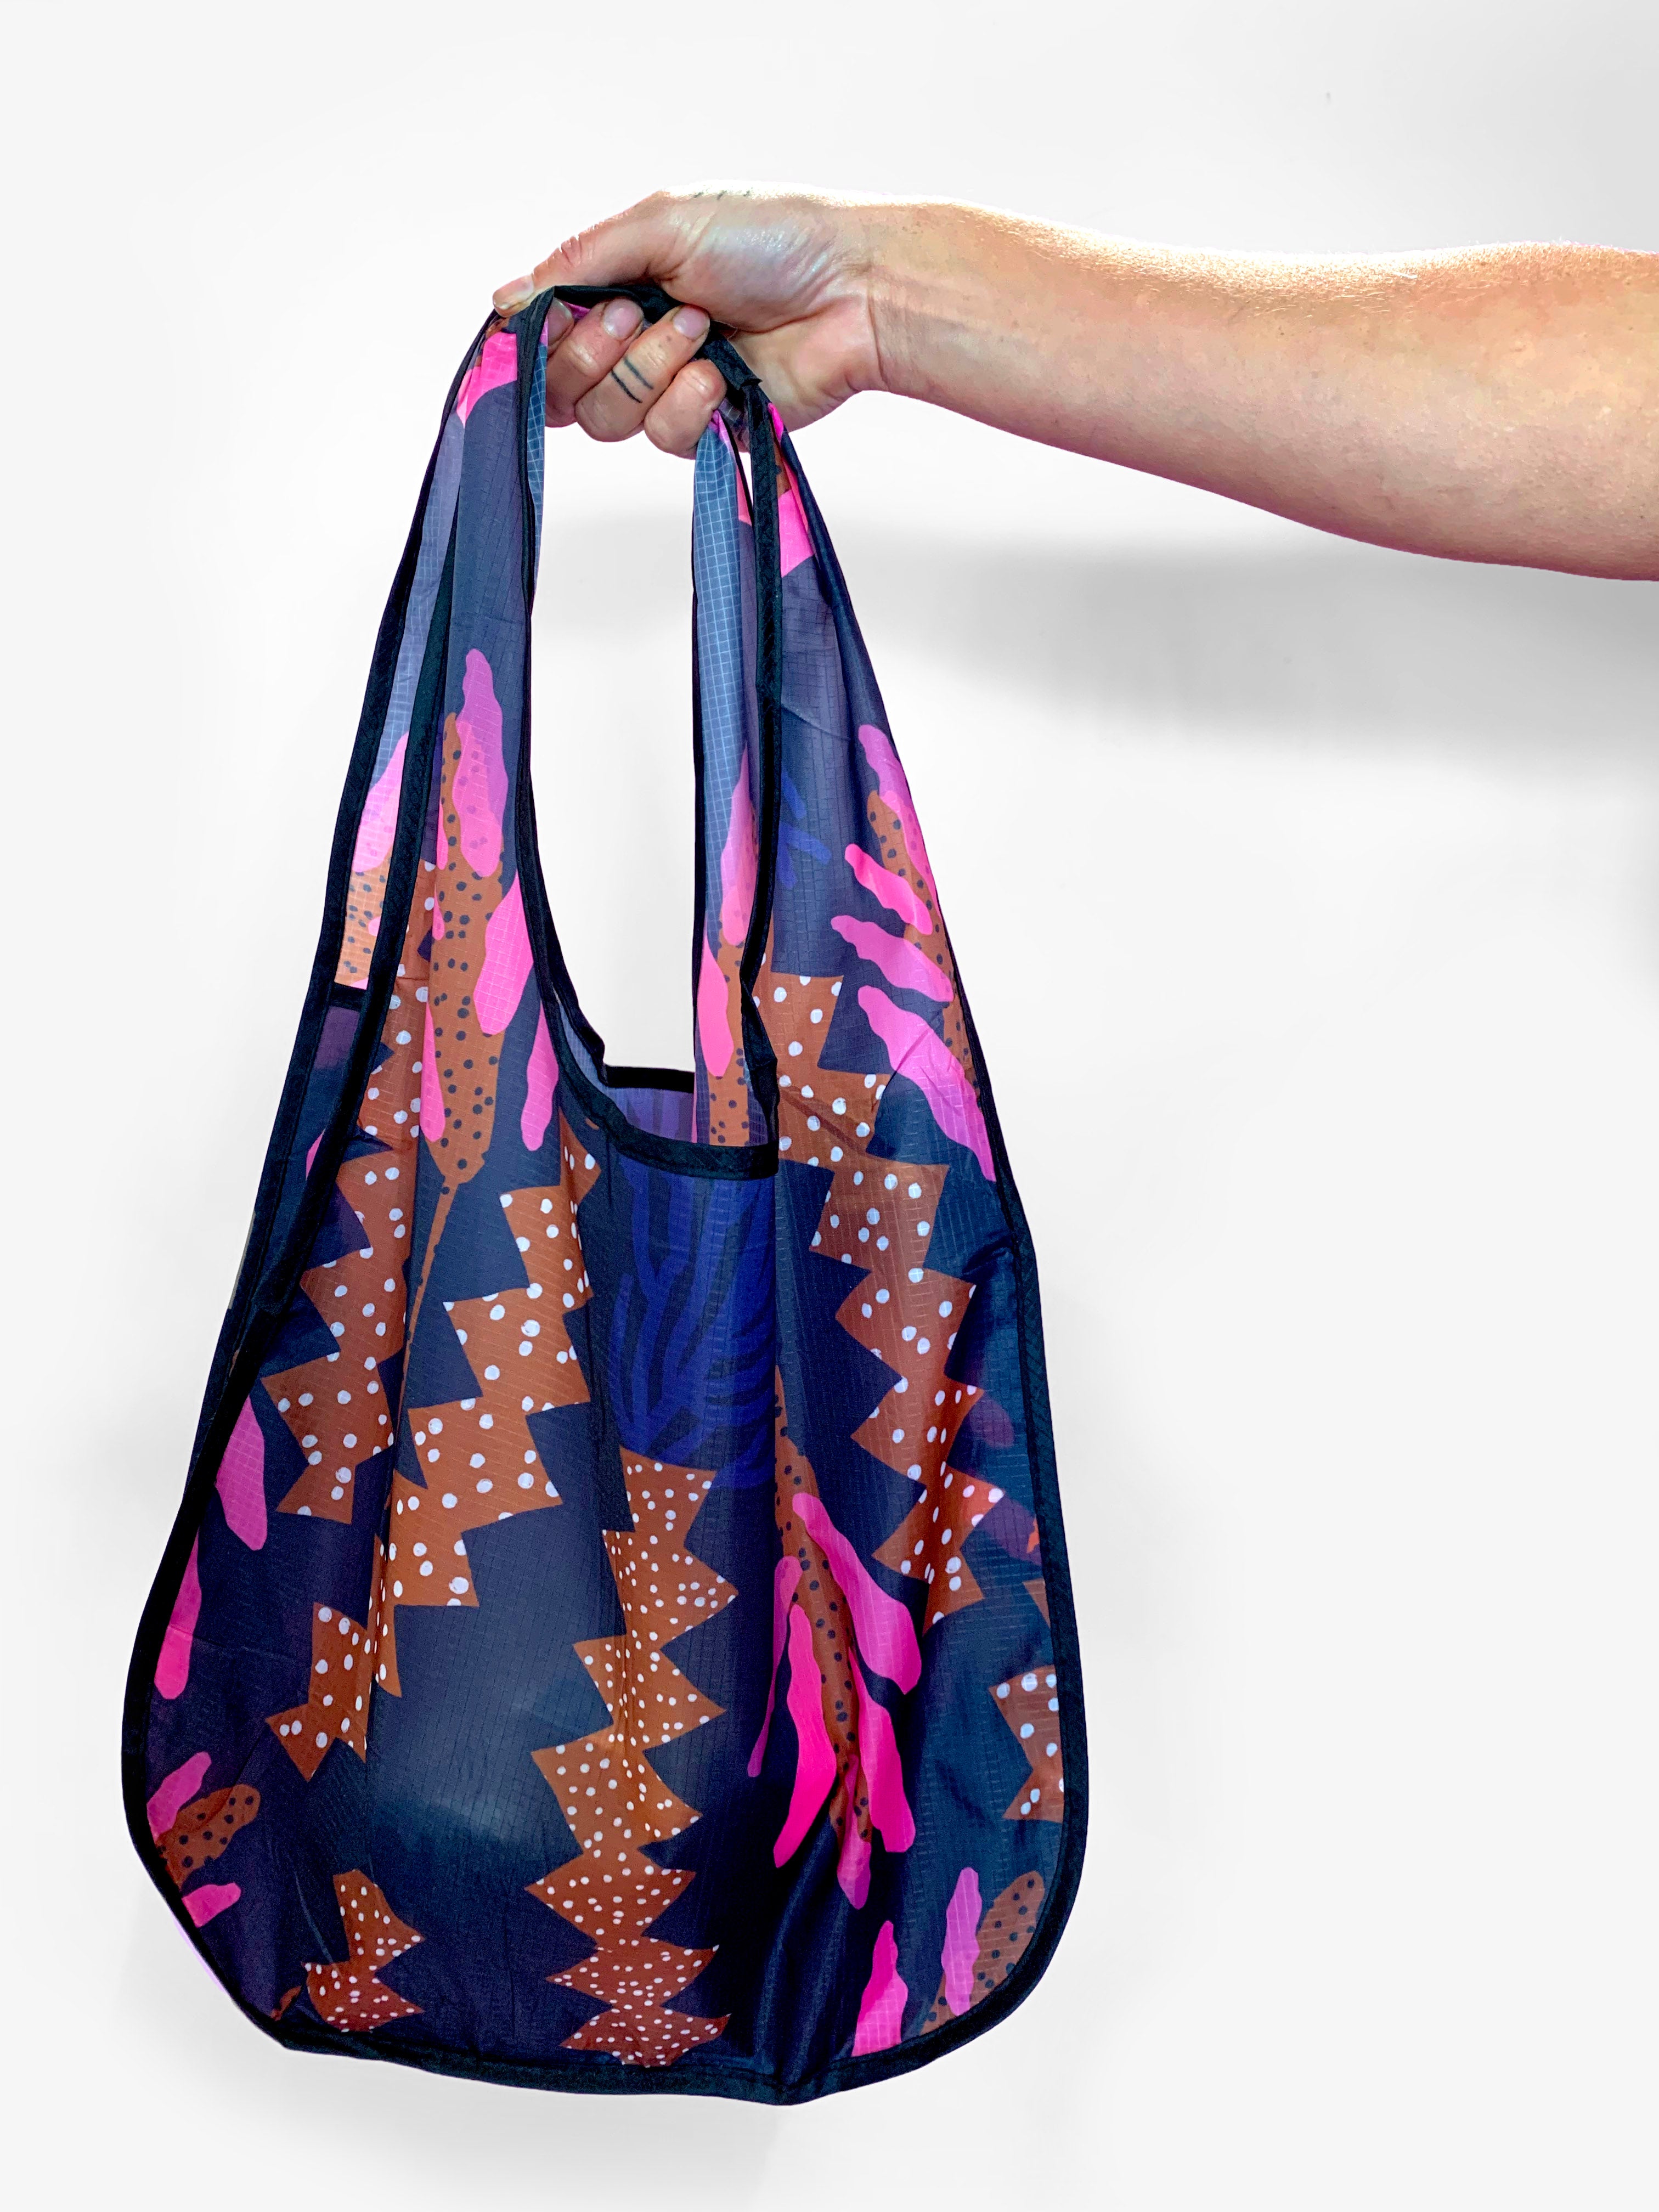 Banksia Bag (comes with pouch)